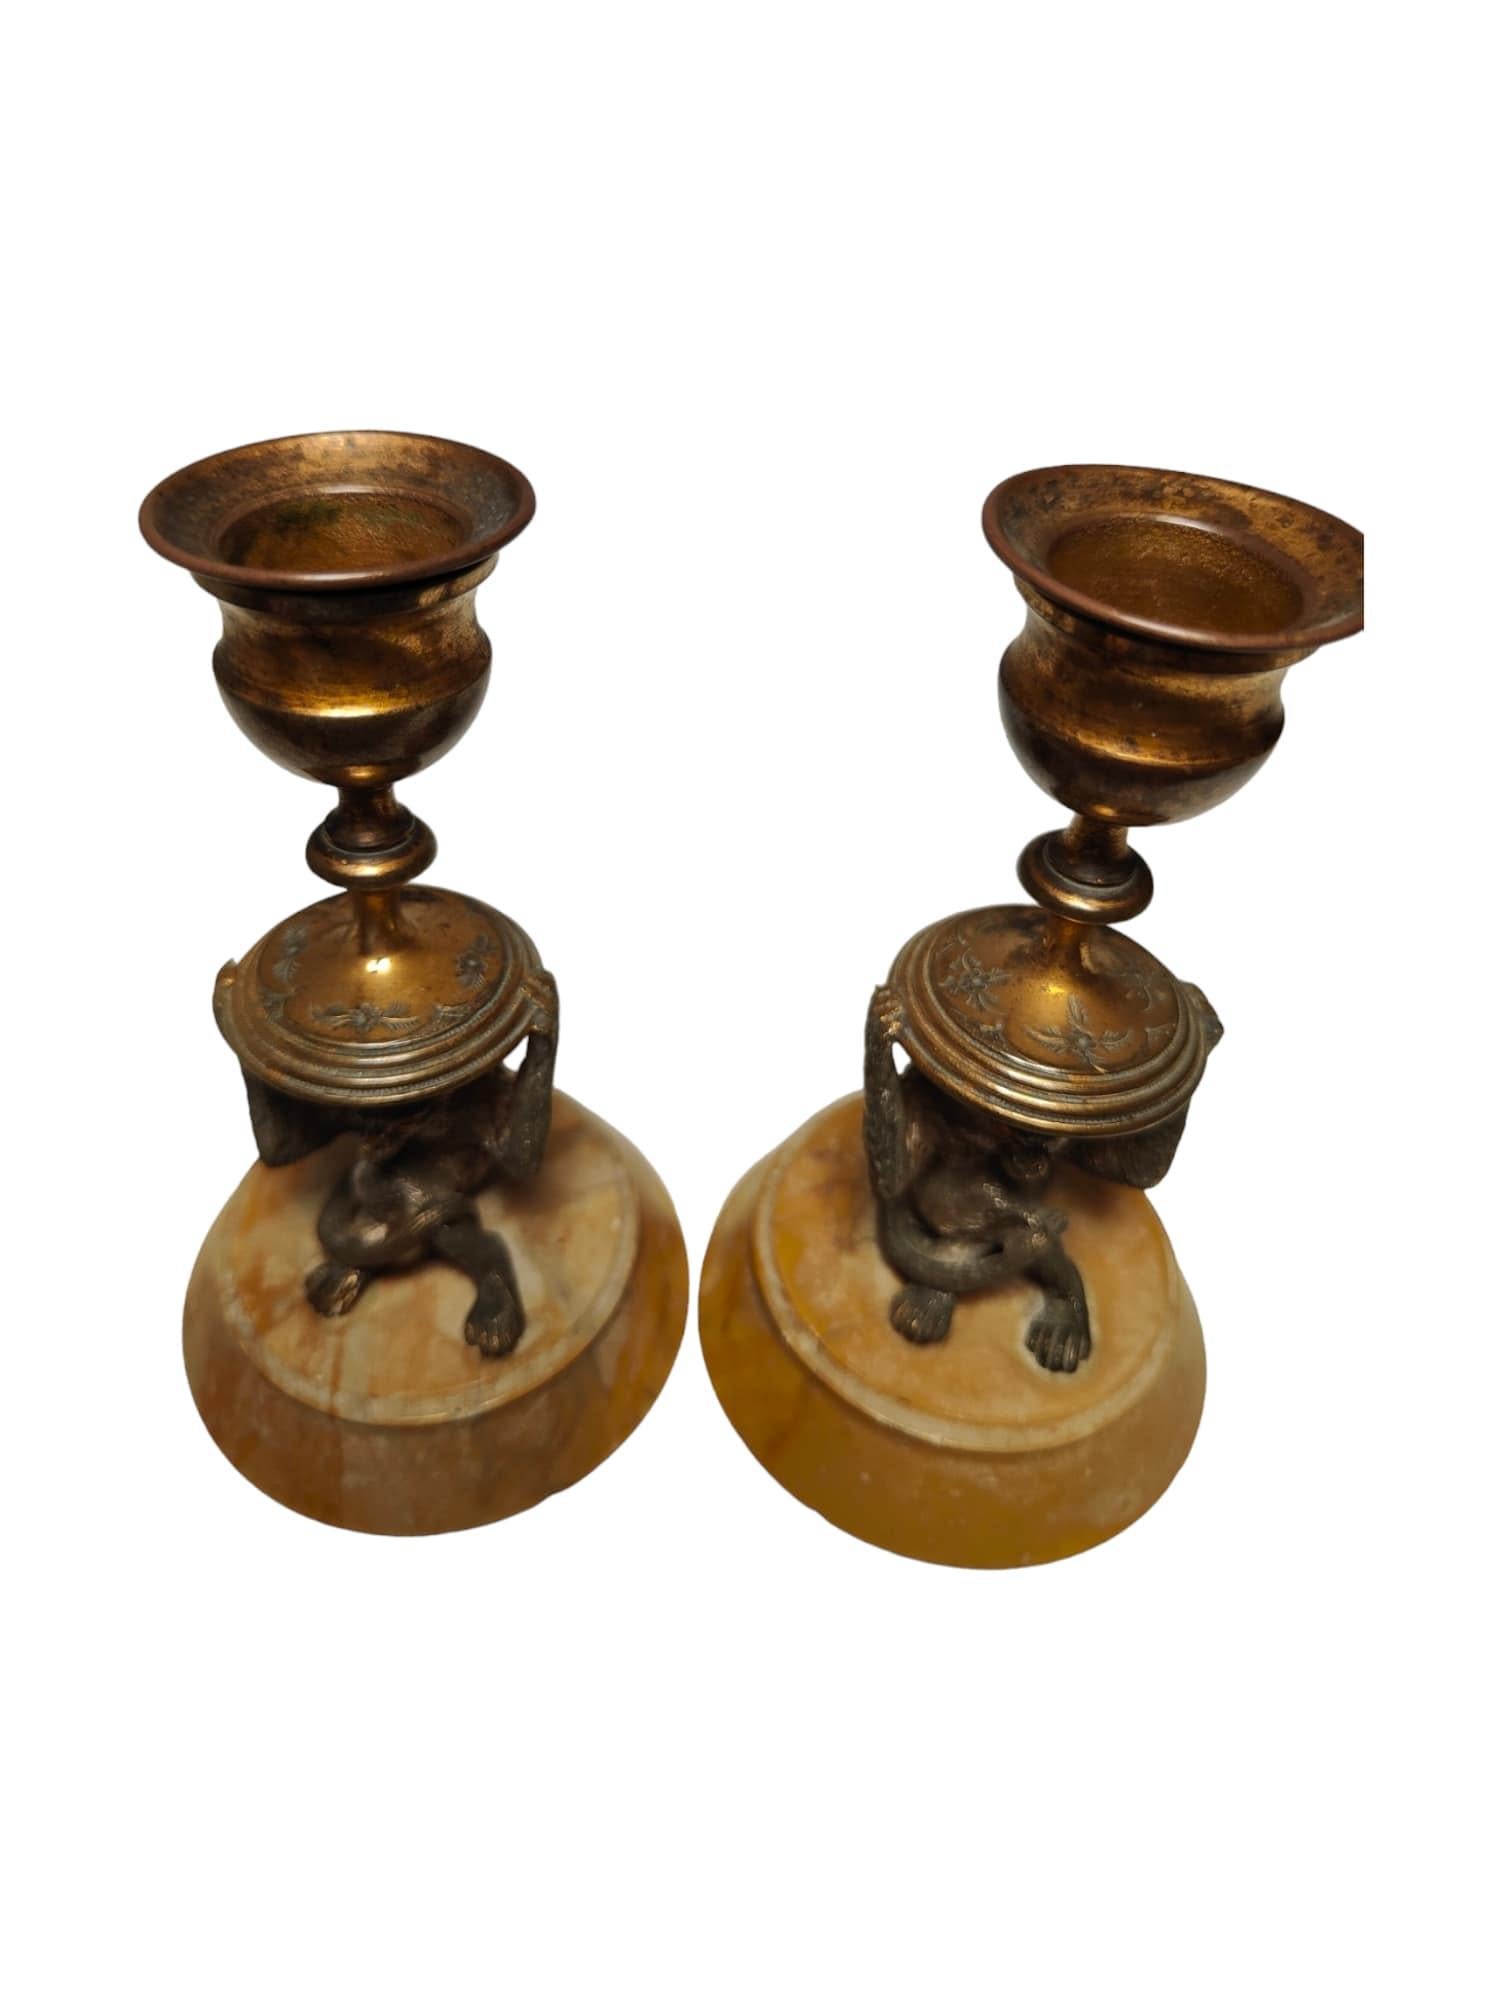 Pair of Miniature Monkey Candlesticks from the 19th Century For Sale 1